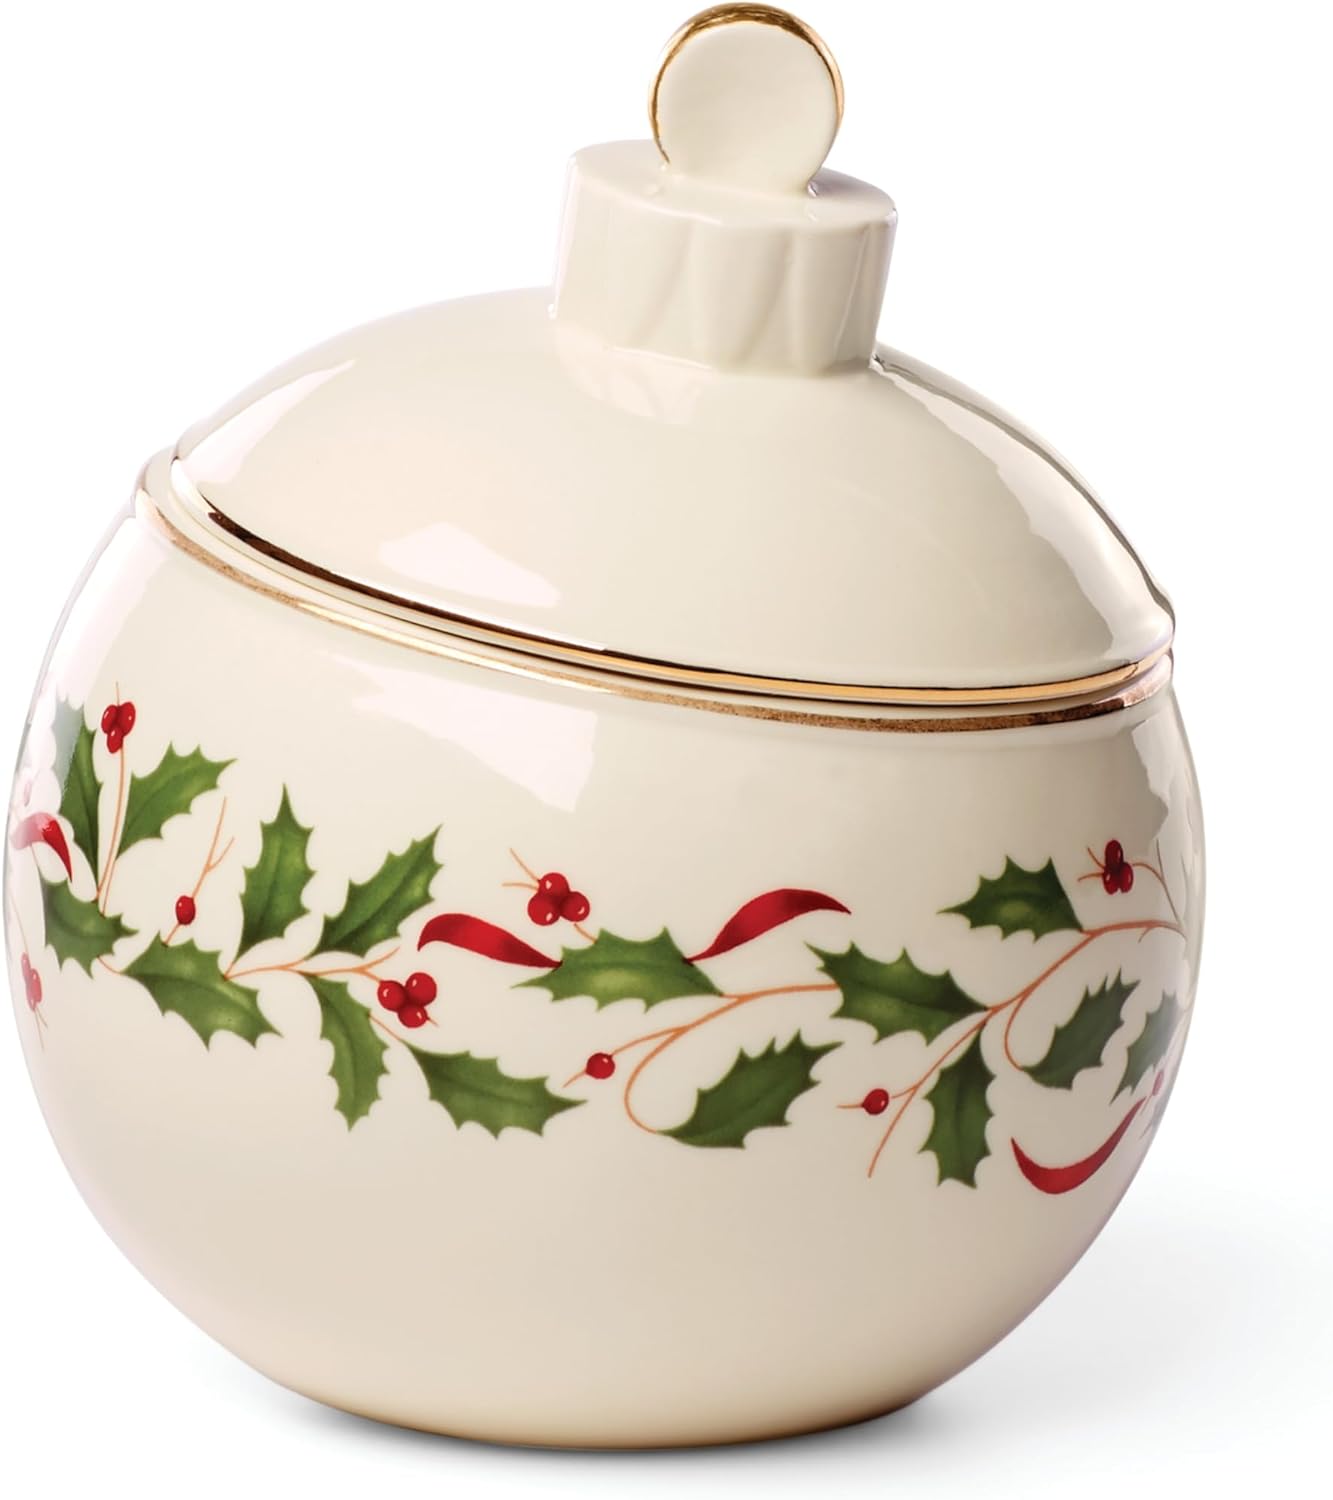 Lenox Holiday Ornament Candy Jar $17.47 shipped w/ Prime